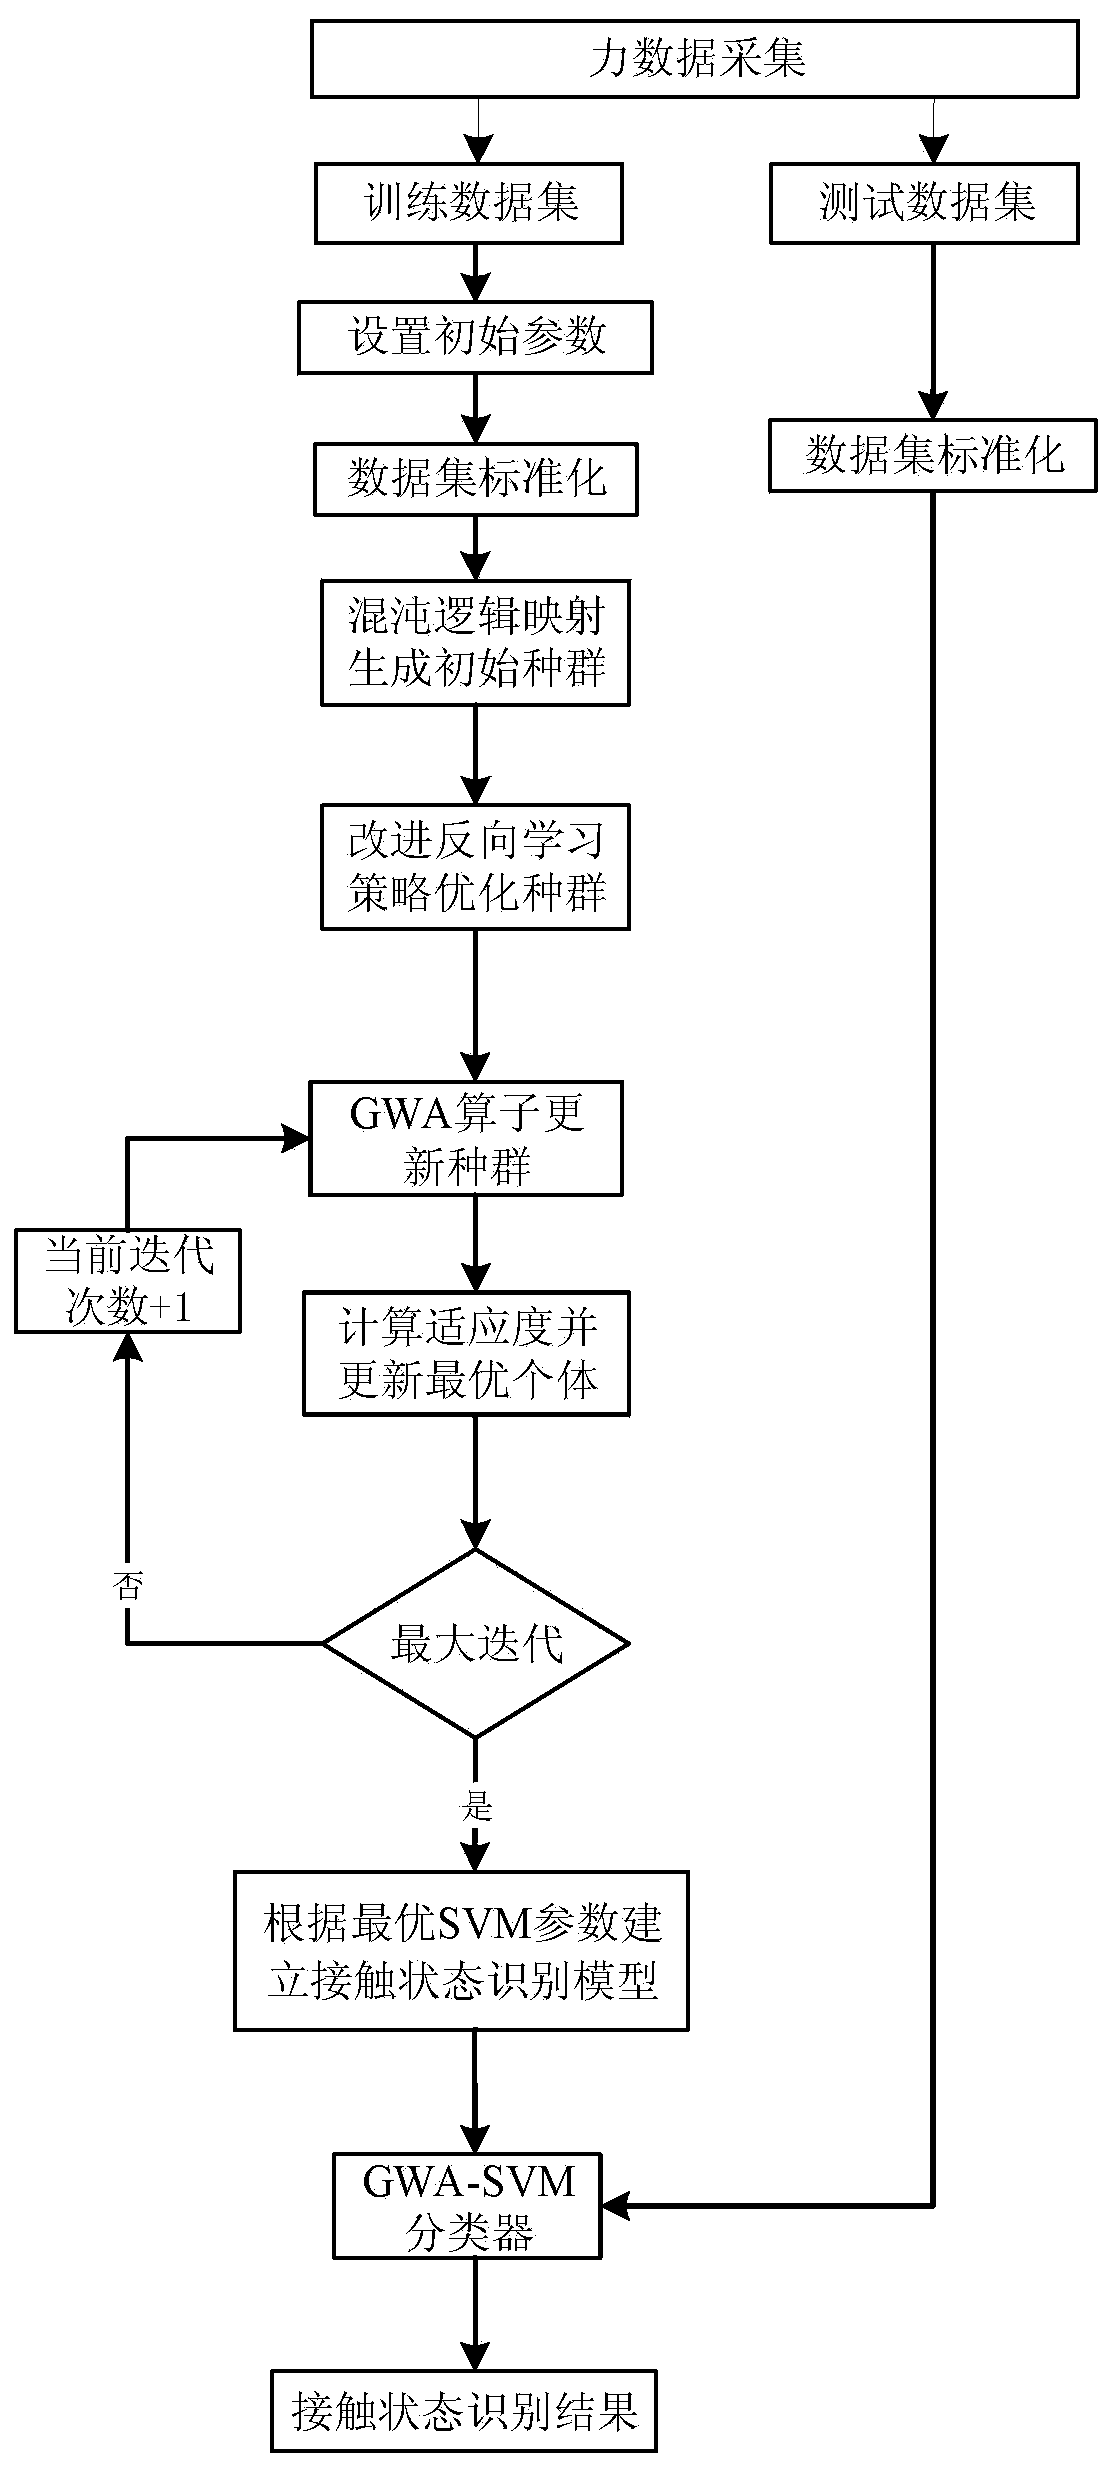 Contact state recognition method for robot assembly based on GWA-SVM